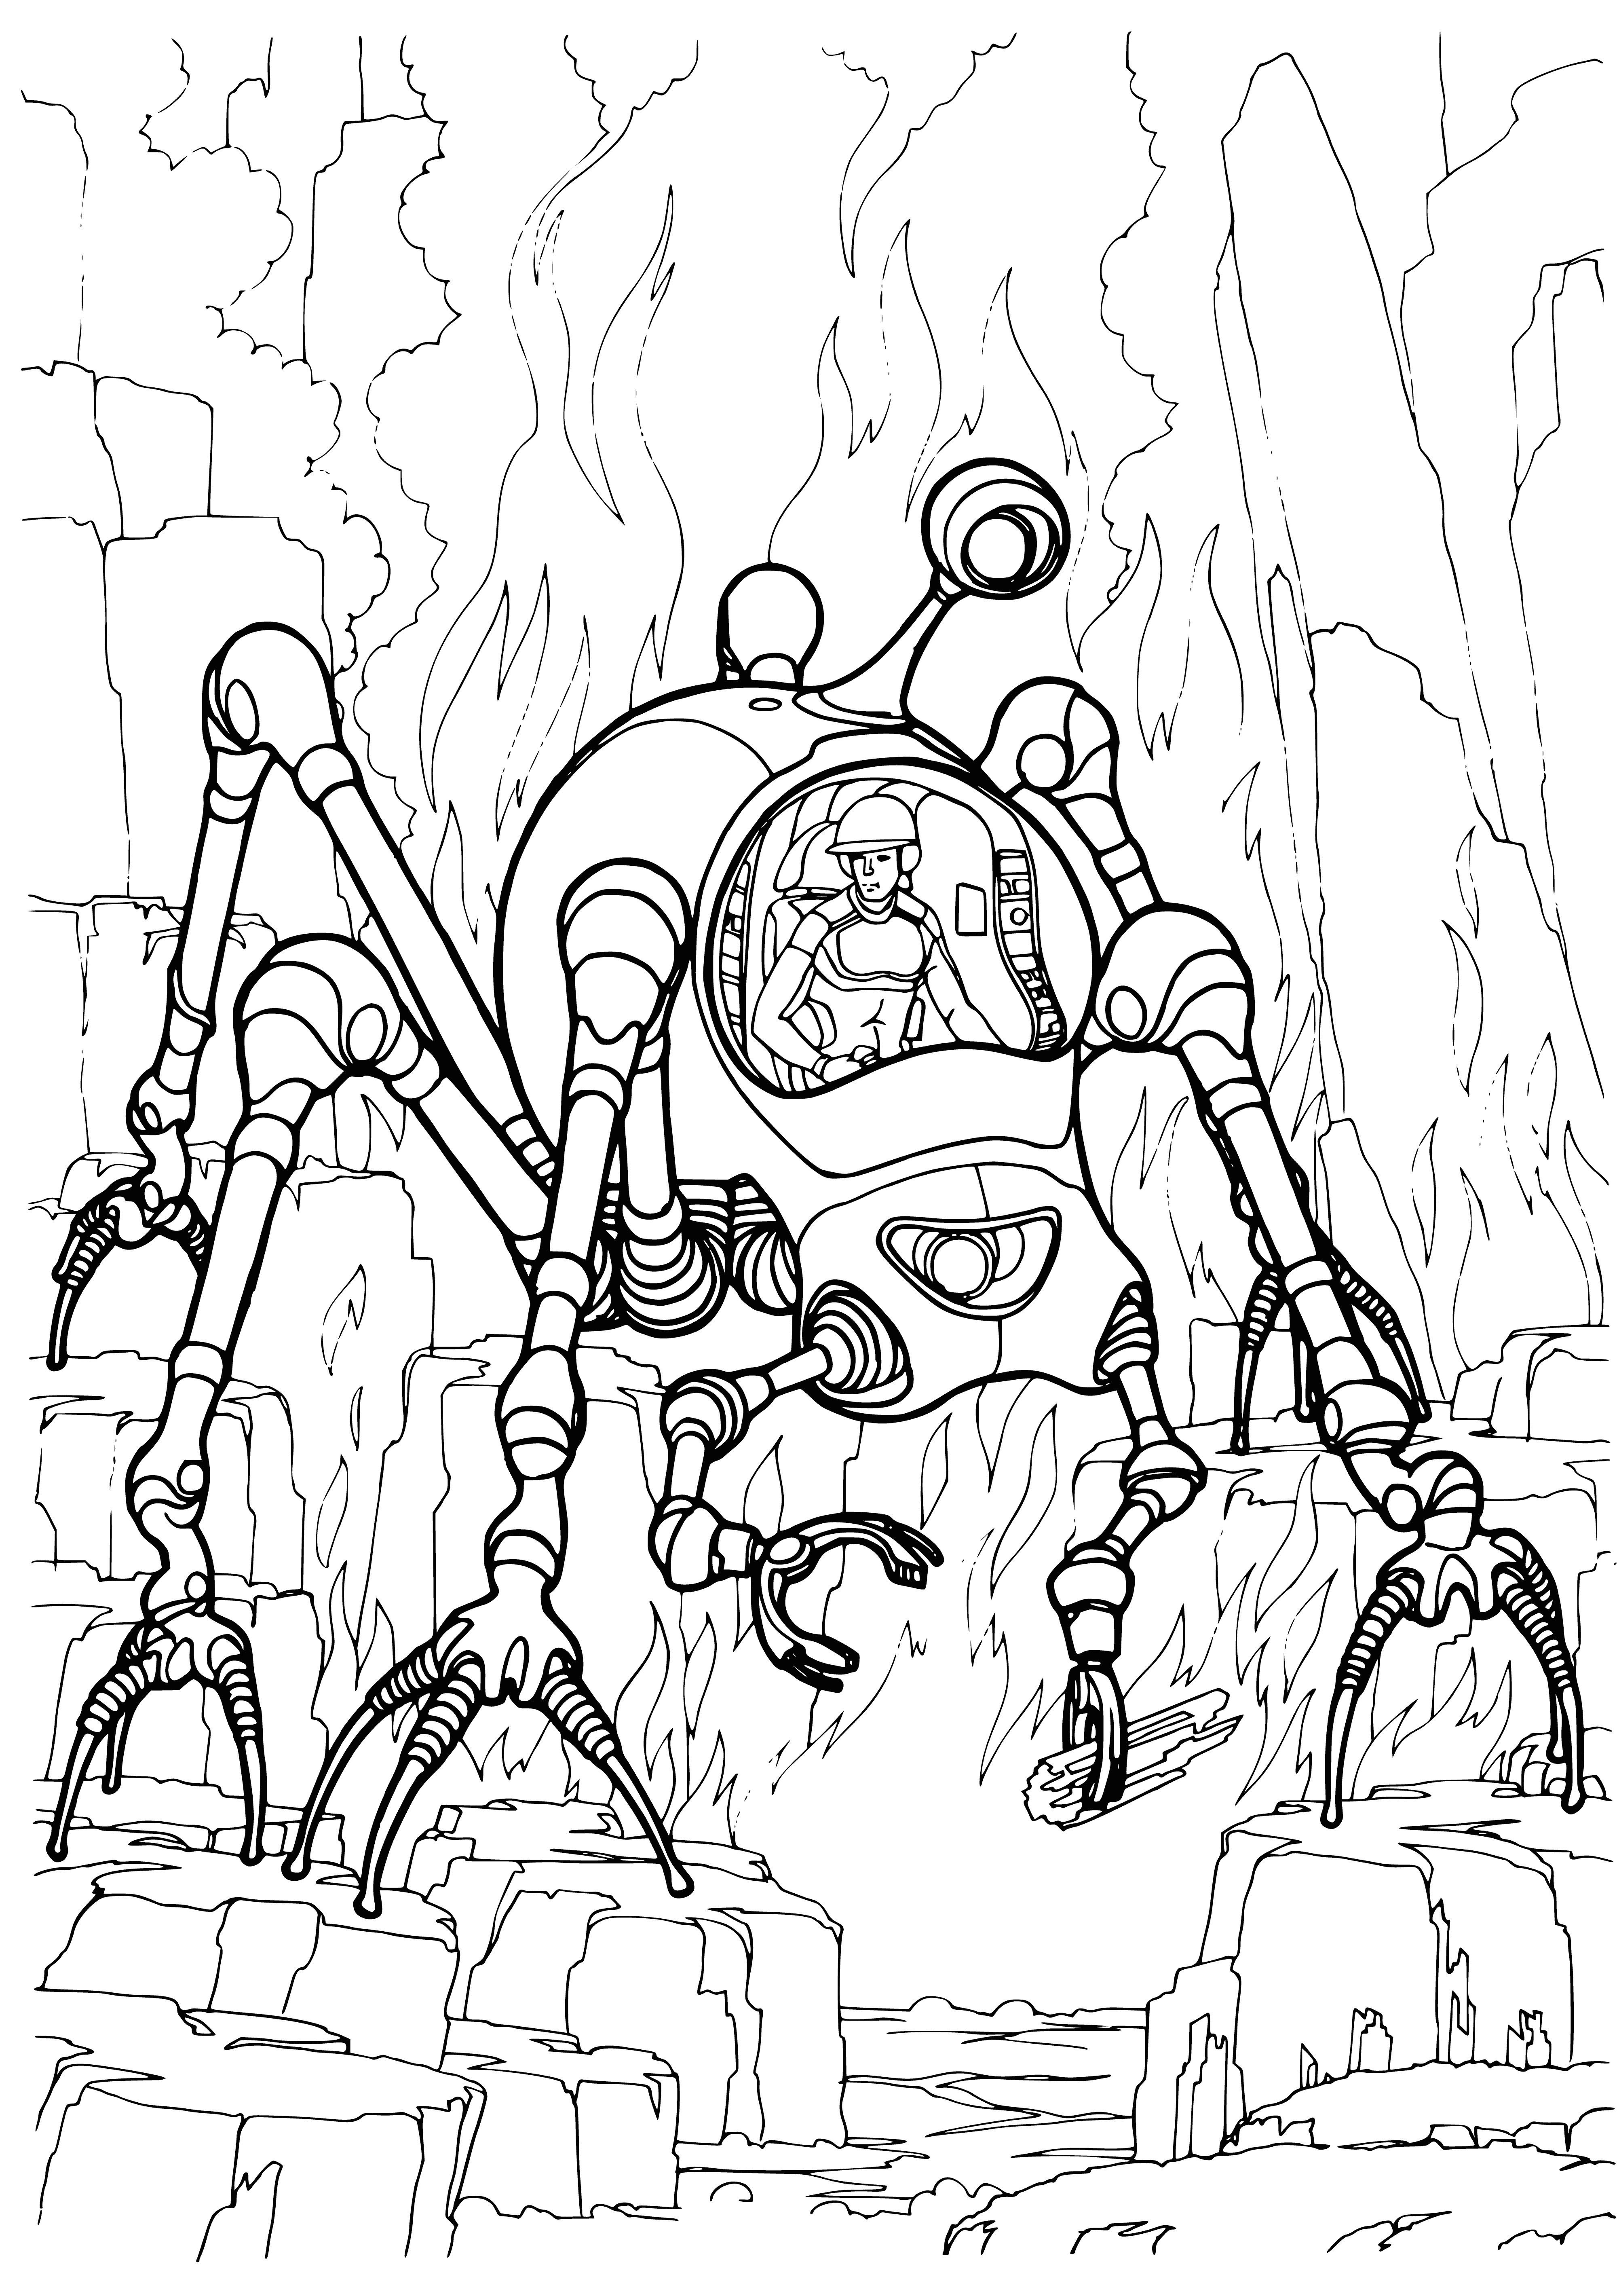 Handmade spider coloring page